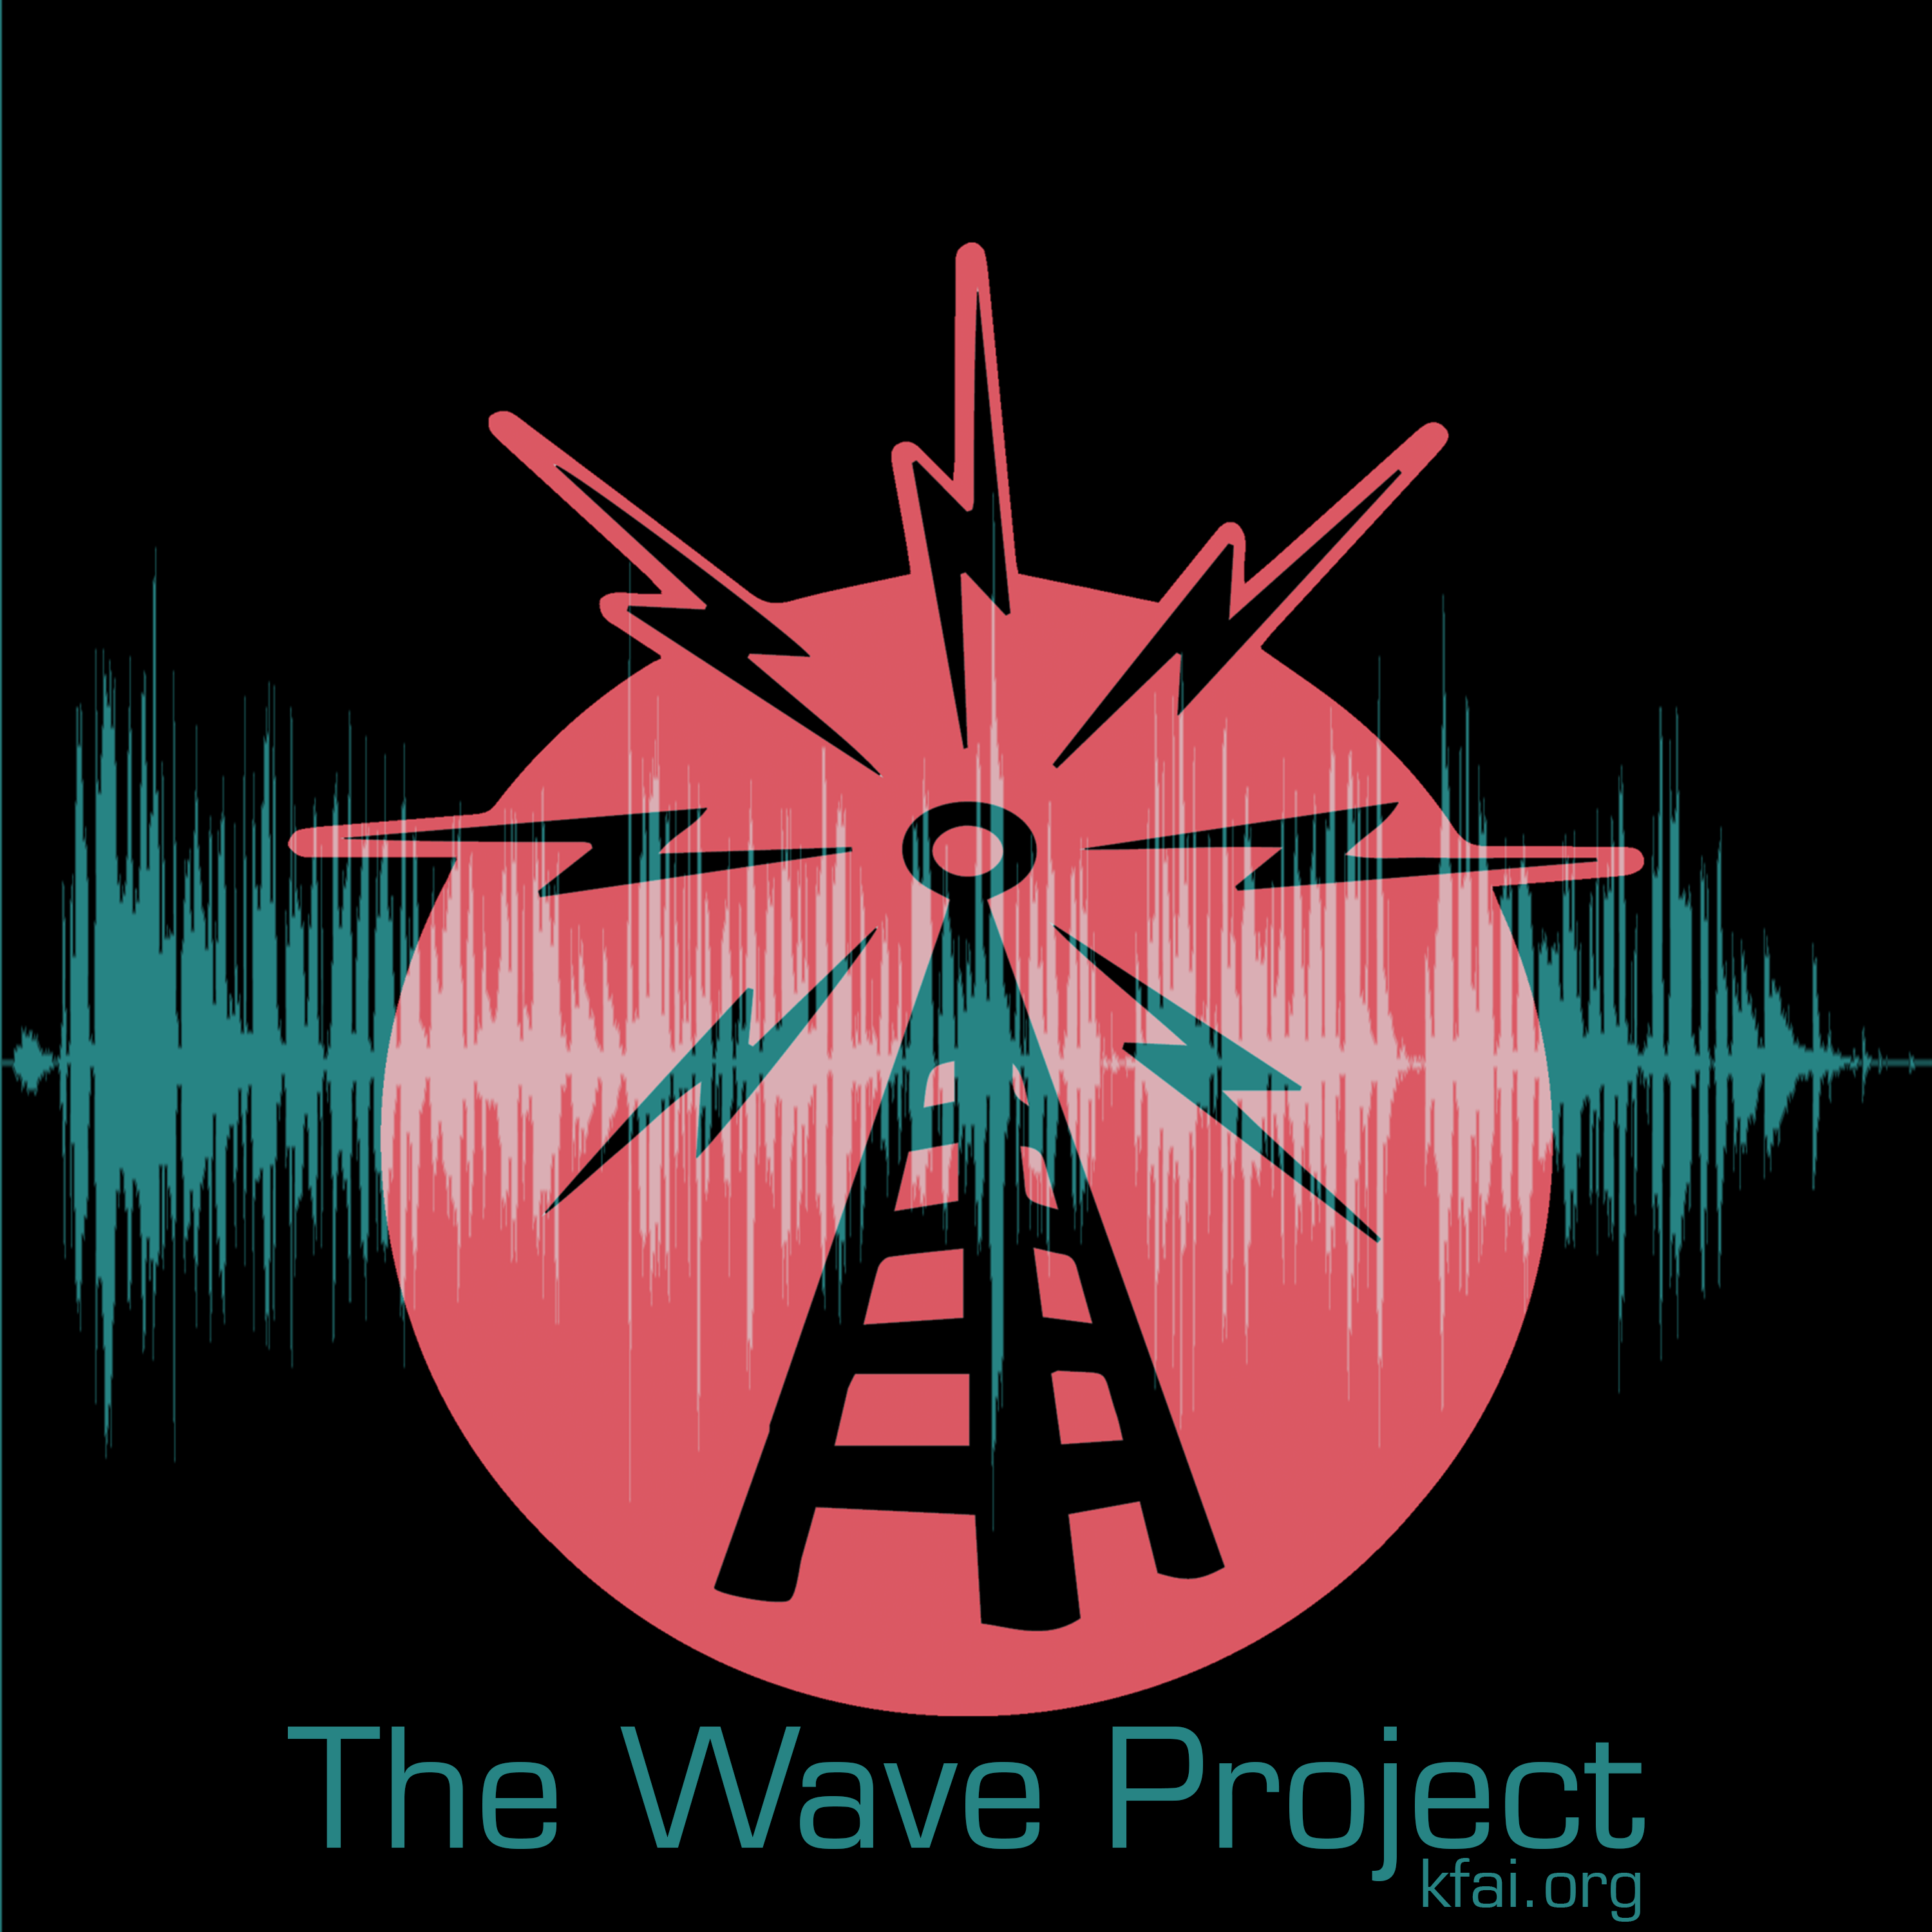 The Wave Project - The Eclectic Collective